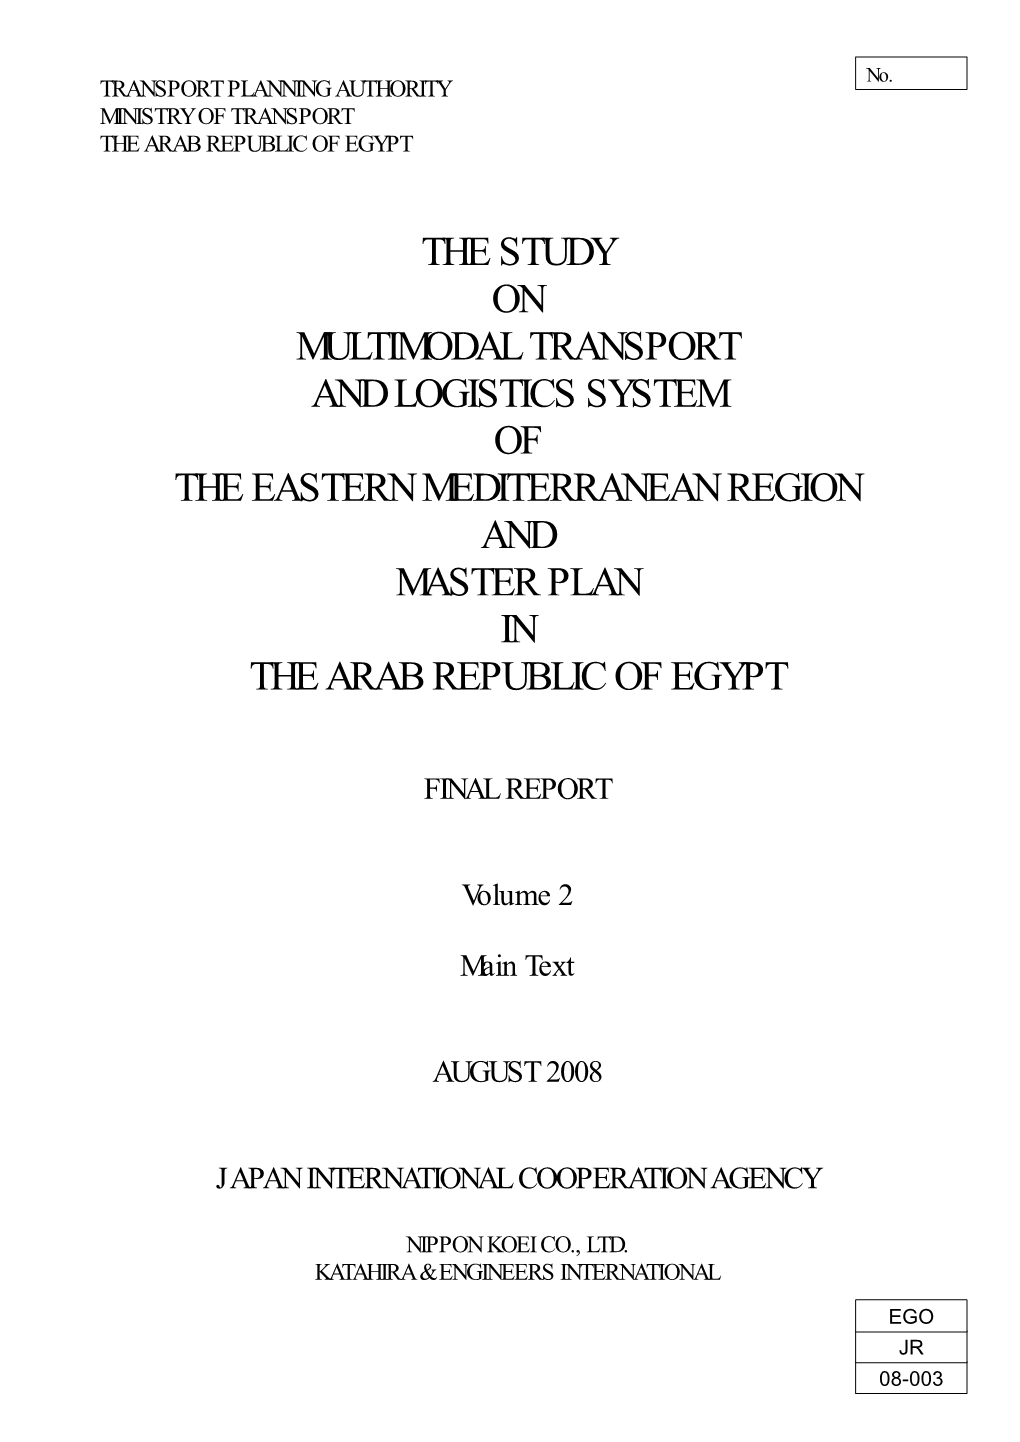 The Study on Multimodal Transport and Logistics System of the Eastern Mediterranean Region and Master Plan in the Arab Republic of Egypt